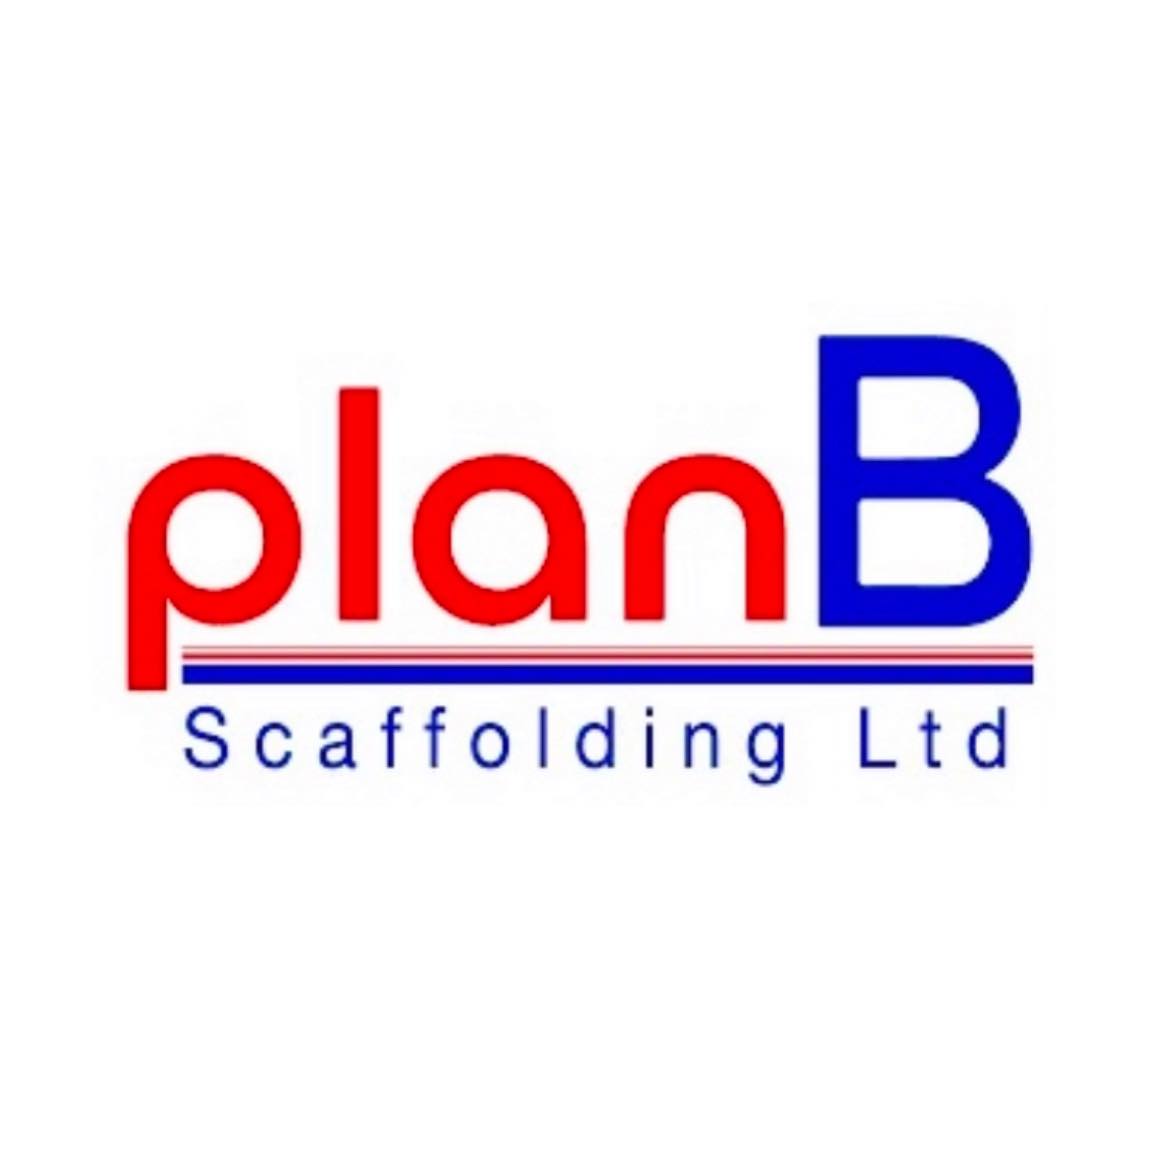 Plan B Scaffolding Ltd - A Reliable Scaffold Company for Commercial or Domestic Work